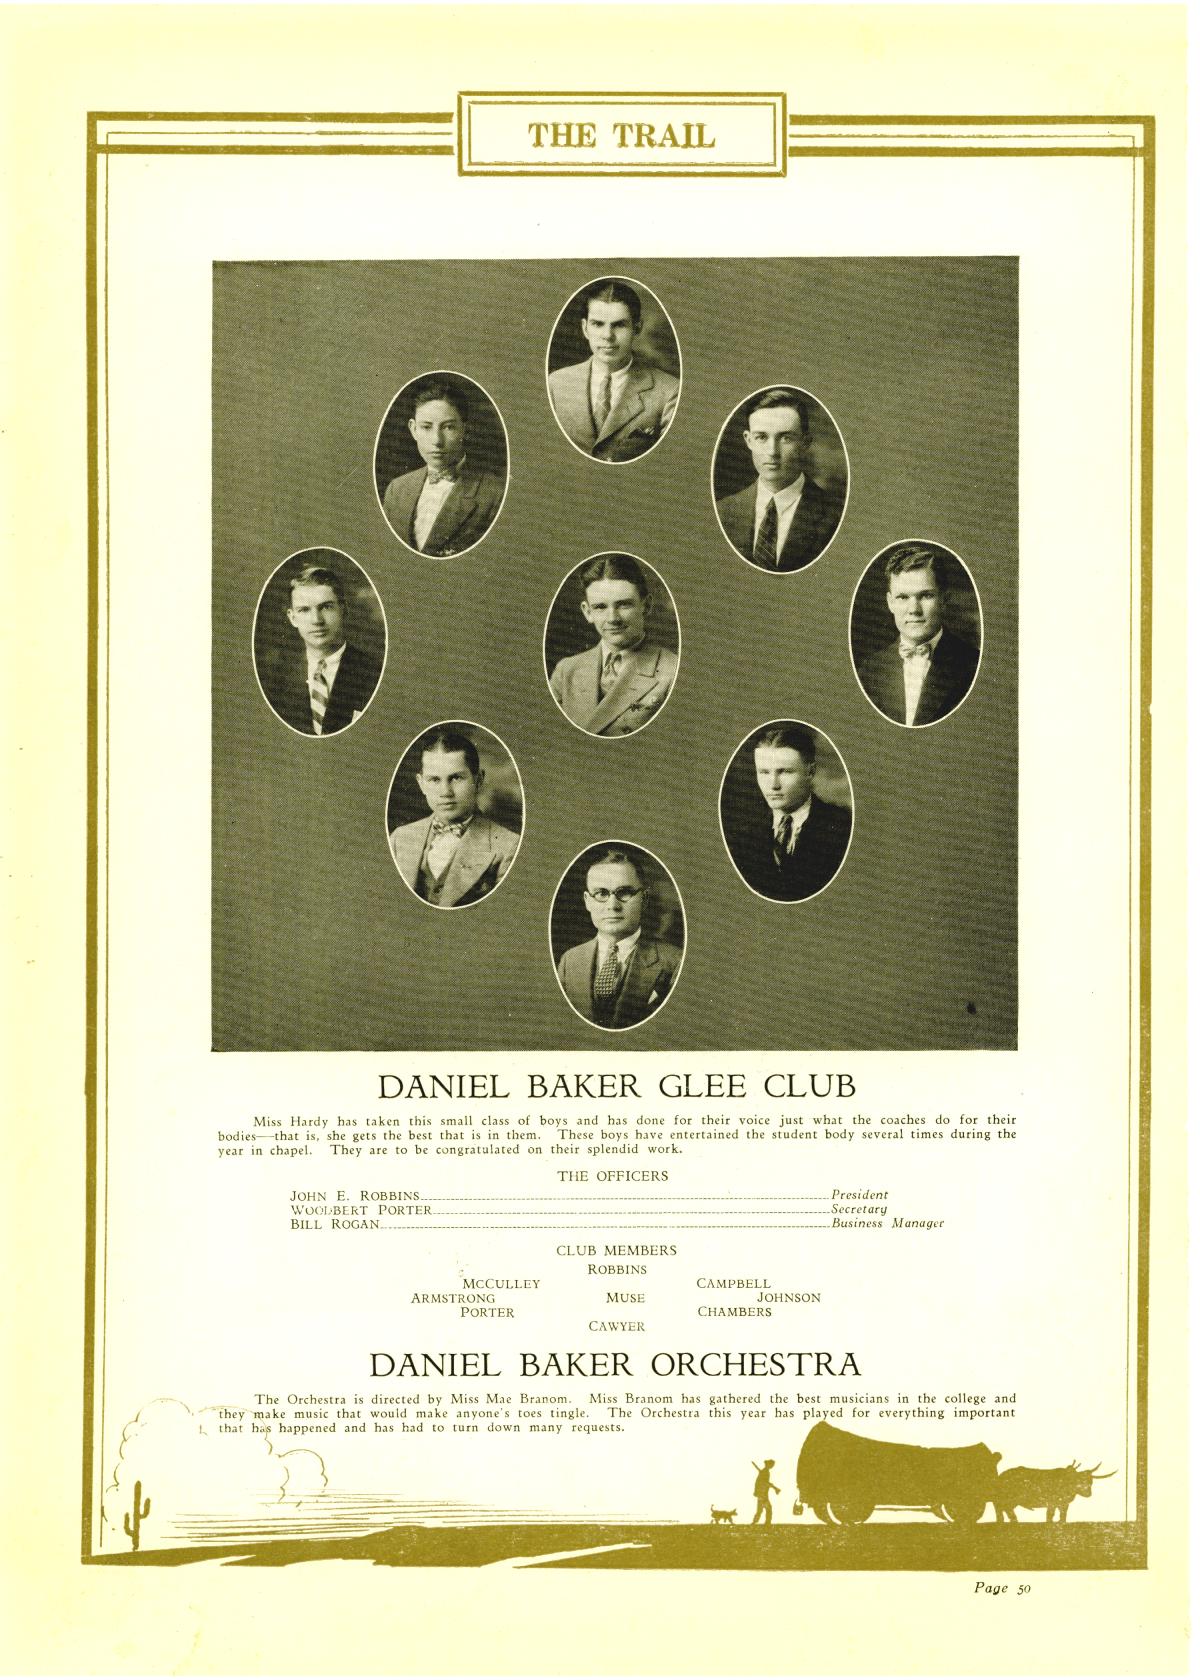 The Trail, Yearbook of Daniel Baker College, 1926
                                                
                                                    50
                                                